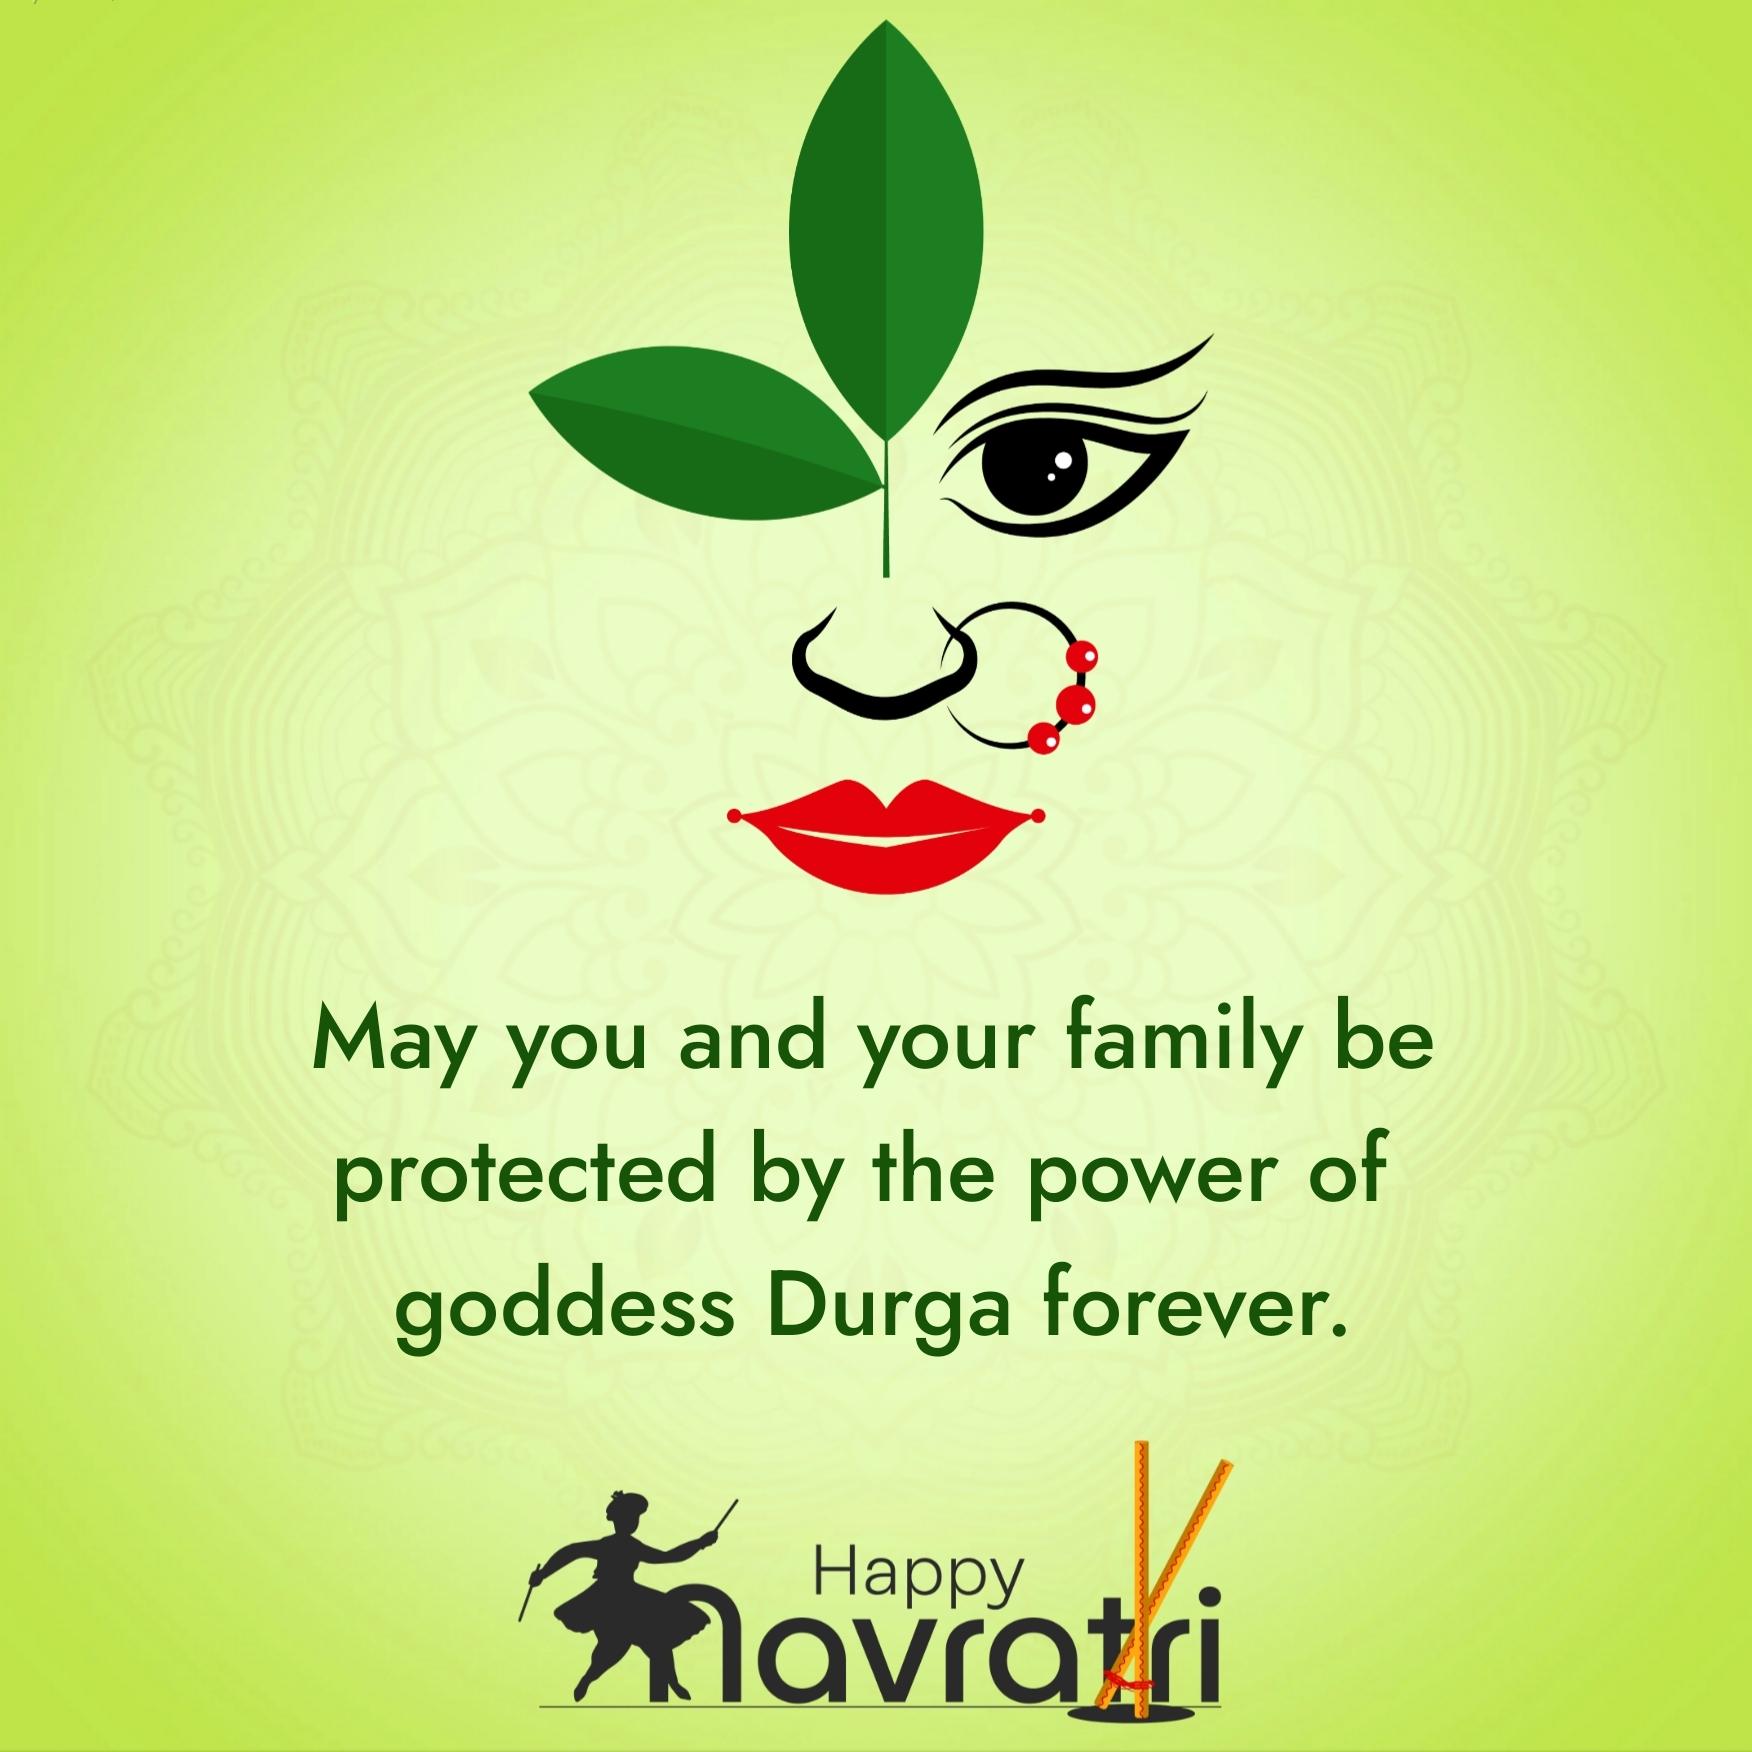 May you and your family be protected by the power of goddess Durga